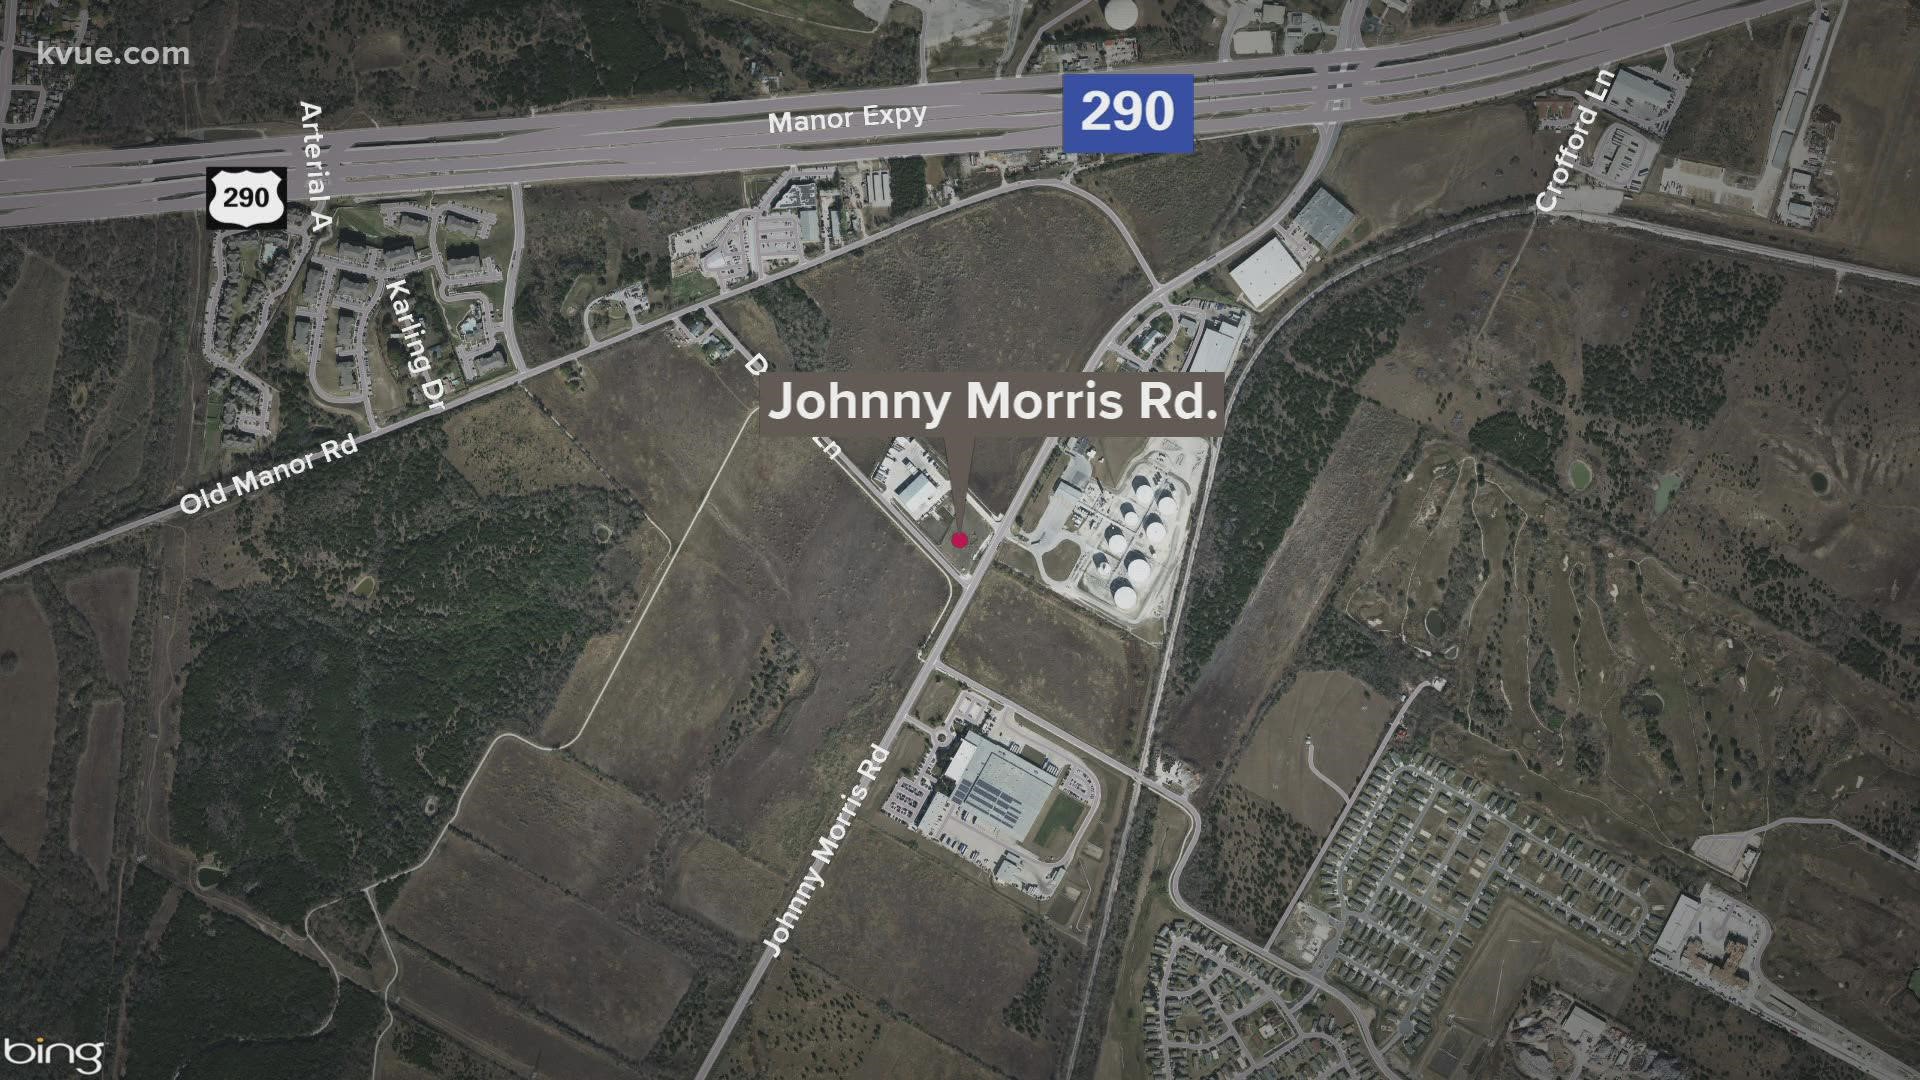 Two people are in the hospital and one person is dead after a car crash on Johnny Morris Road.